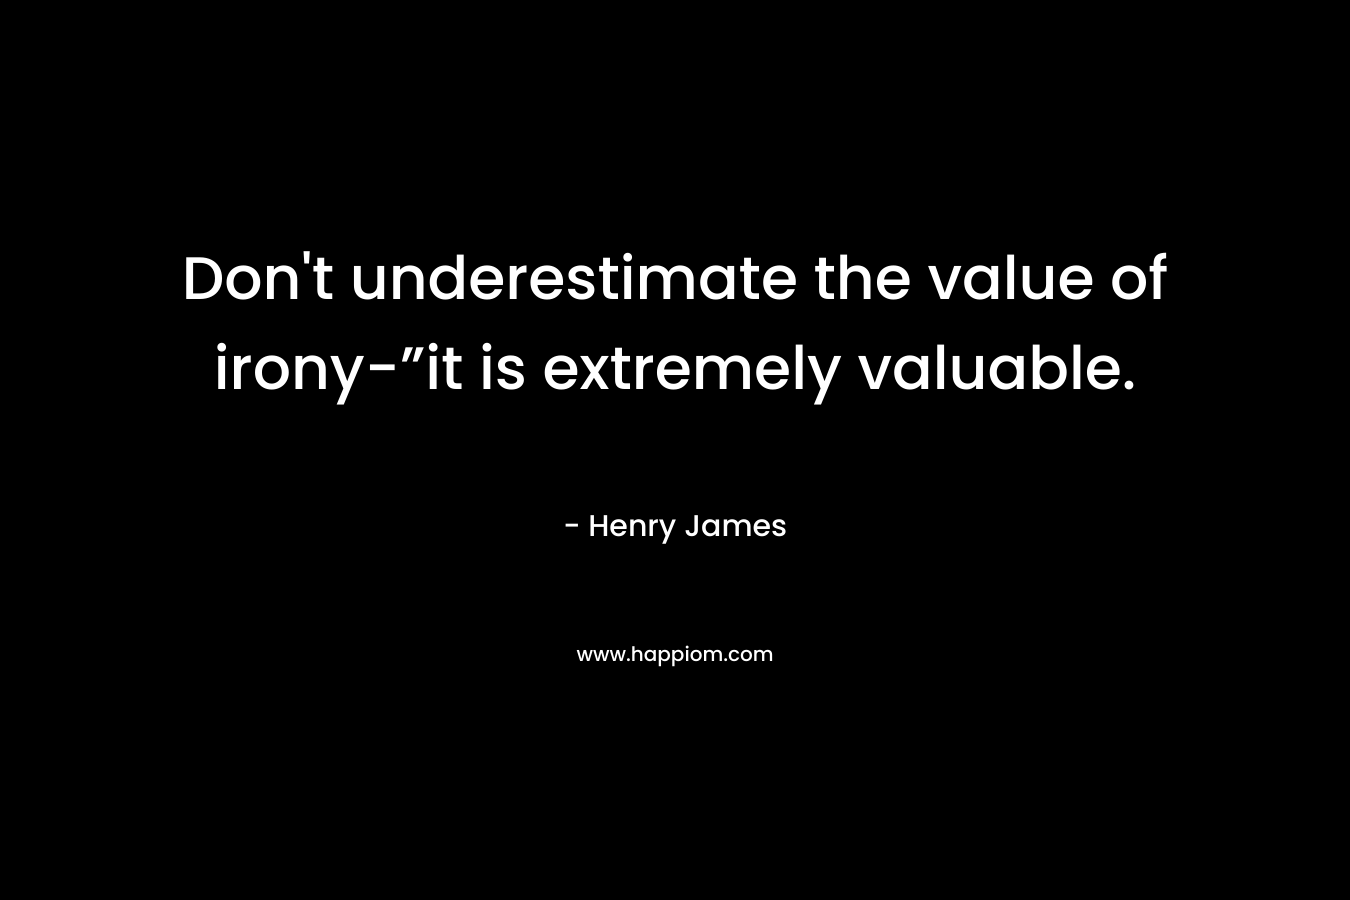 Don't underestimate the value of irony-”it is extremely valuable.